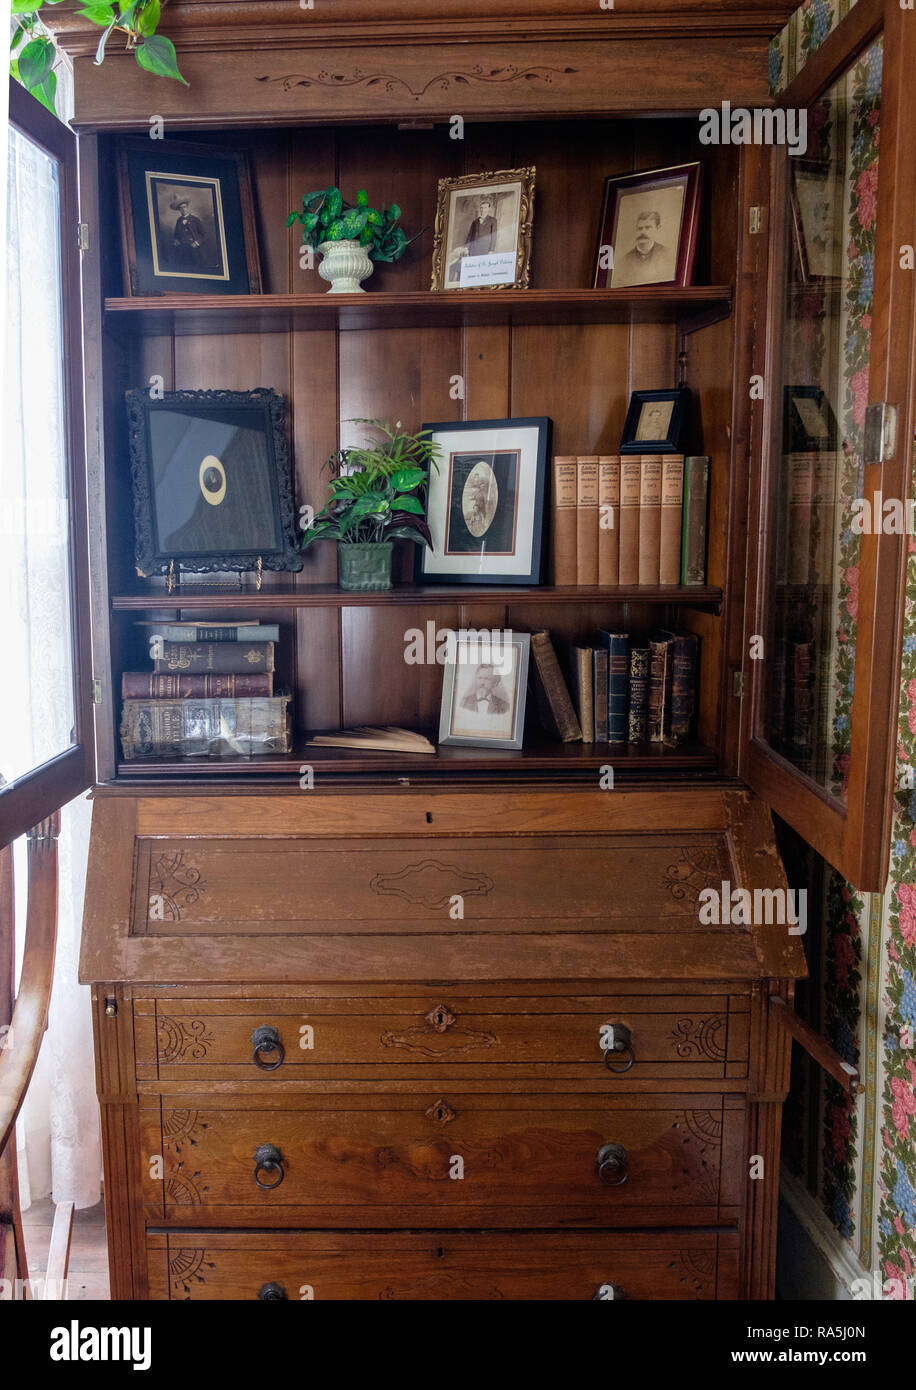 Antique wooden shelves and chest of drawers with antique photos and old ragged books. Interior of old Texan home, Chestnut Square, McKinney Texas. Stock Photo